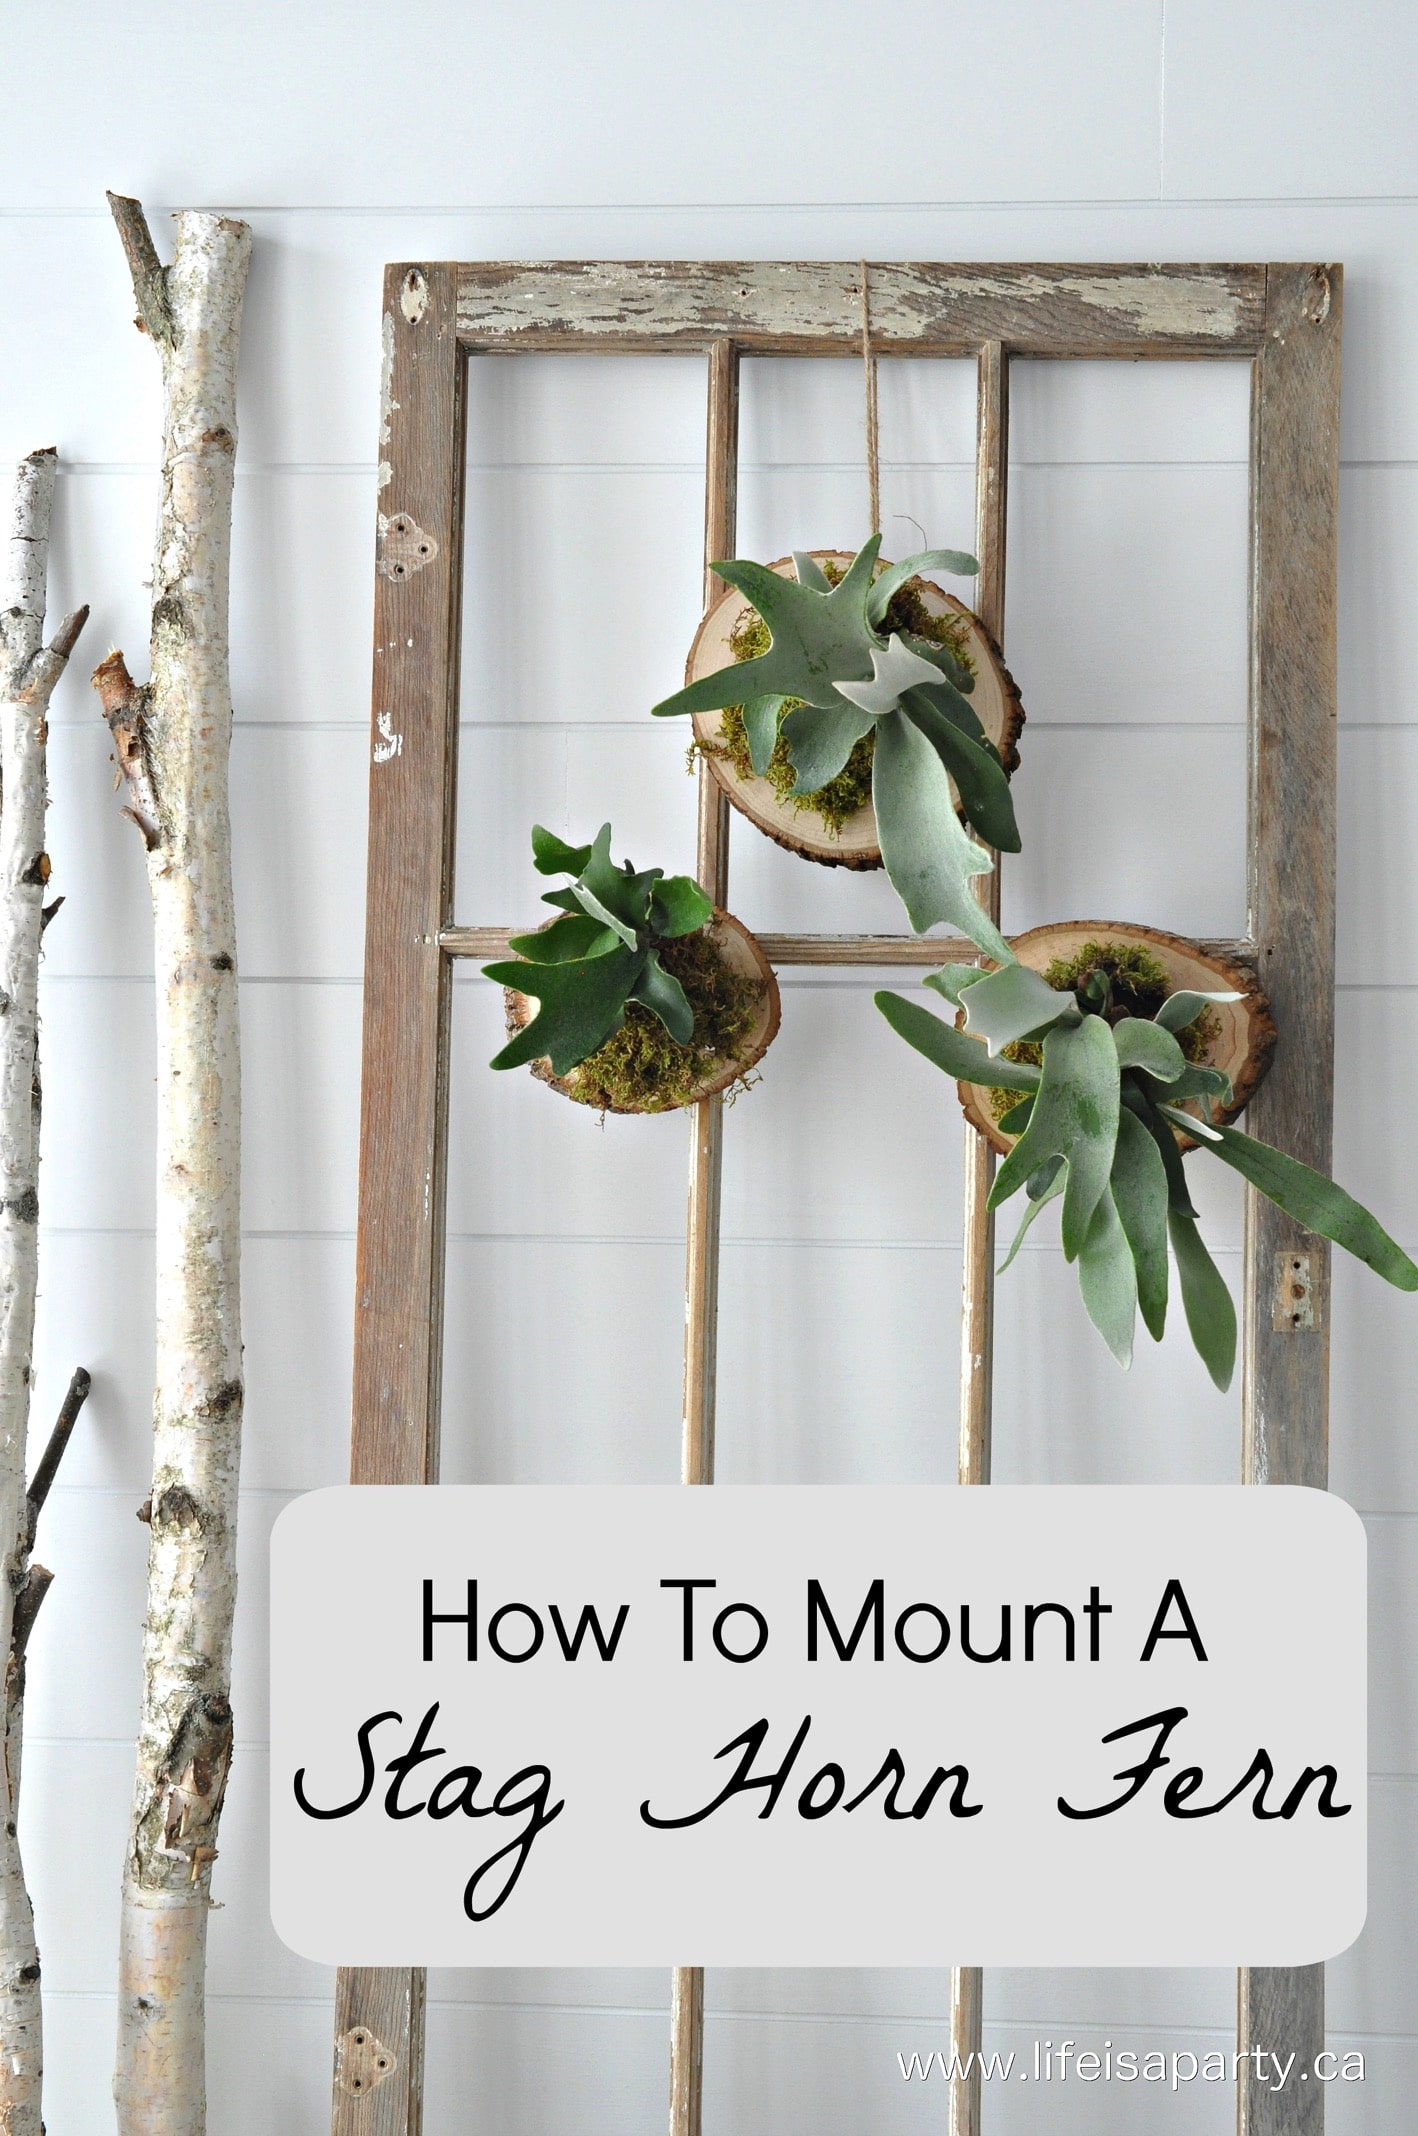 How To Mount A Stag Horn Fern: great tutorial to take a potted stag horn fern and mount it onto wood so it can hang.